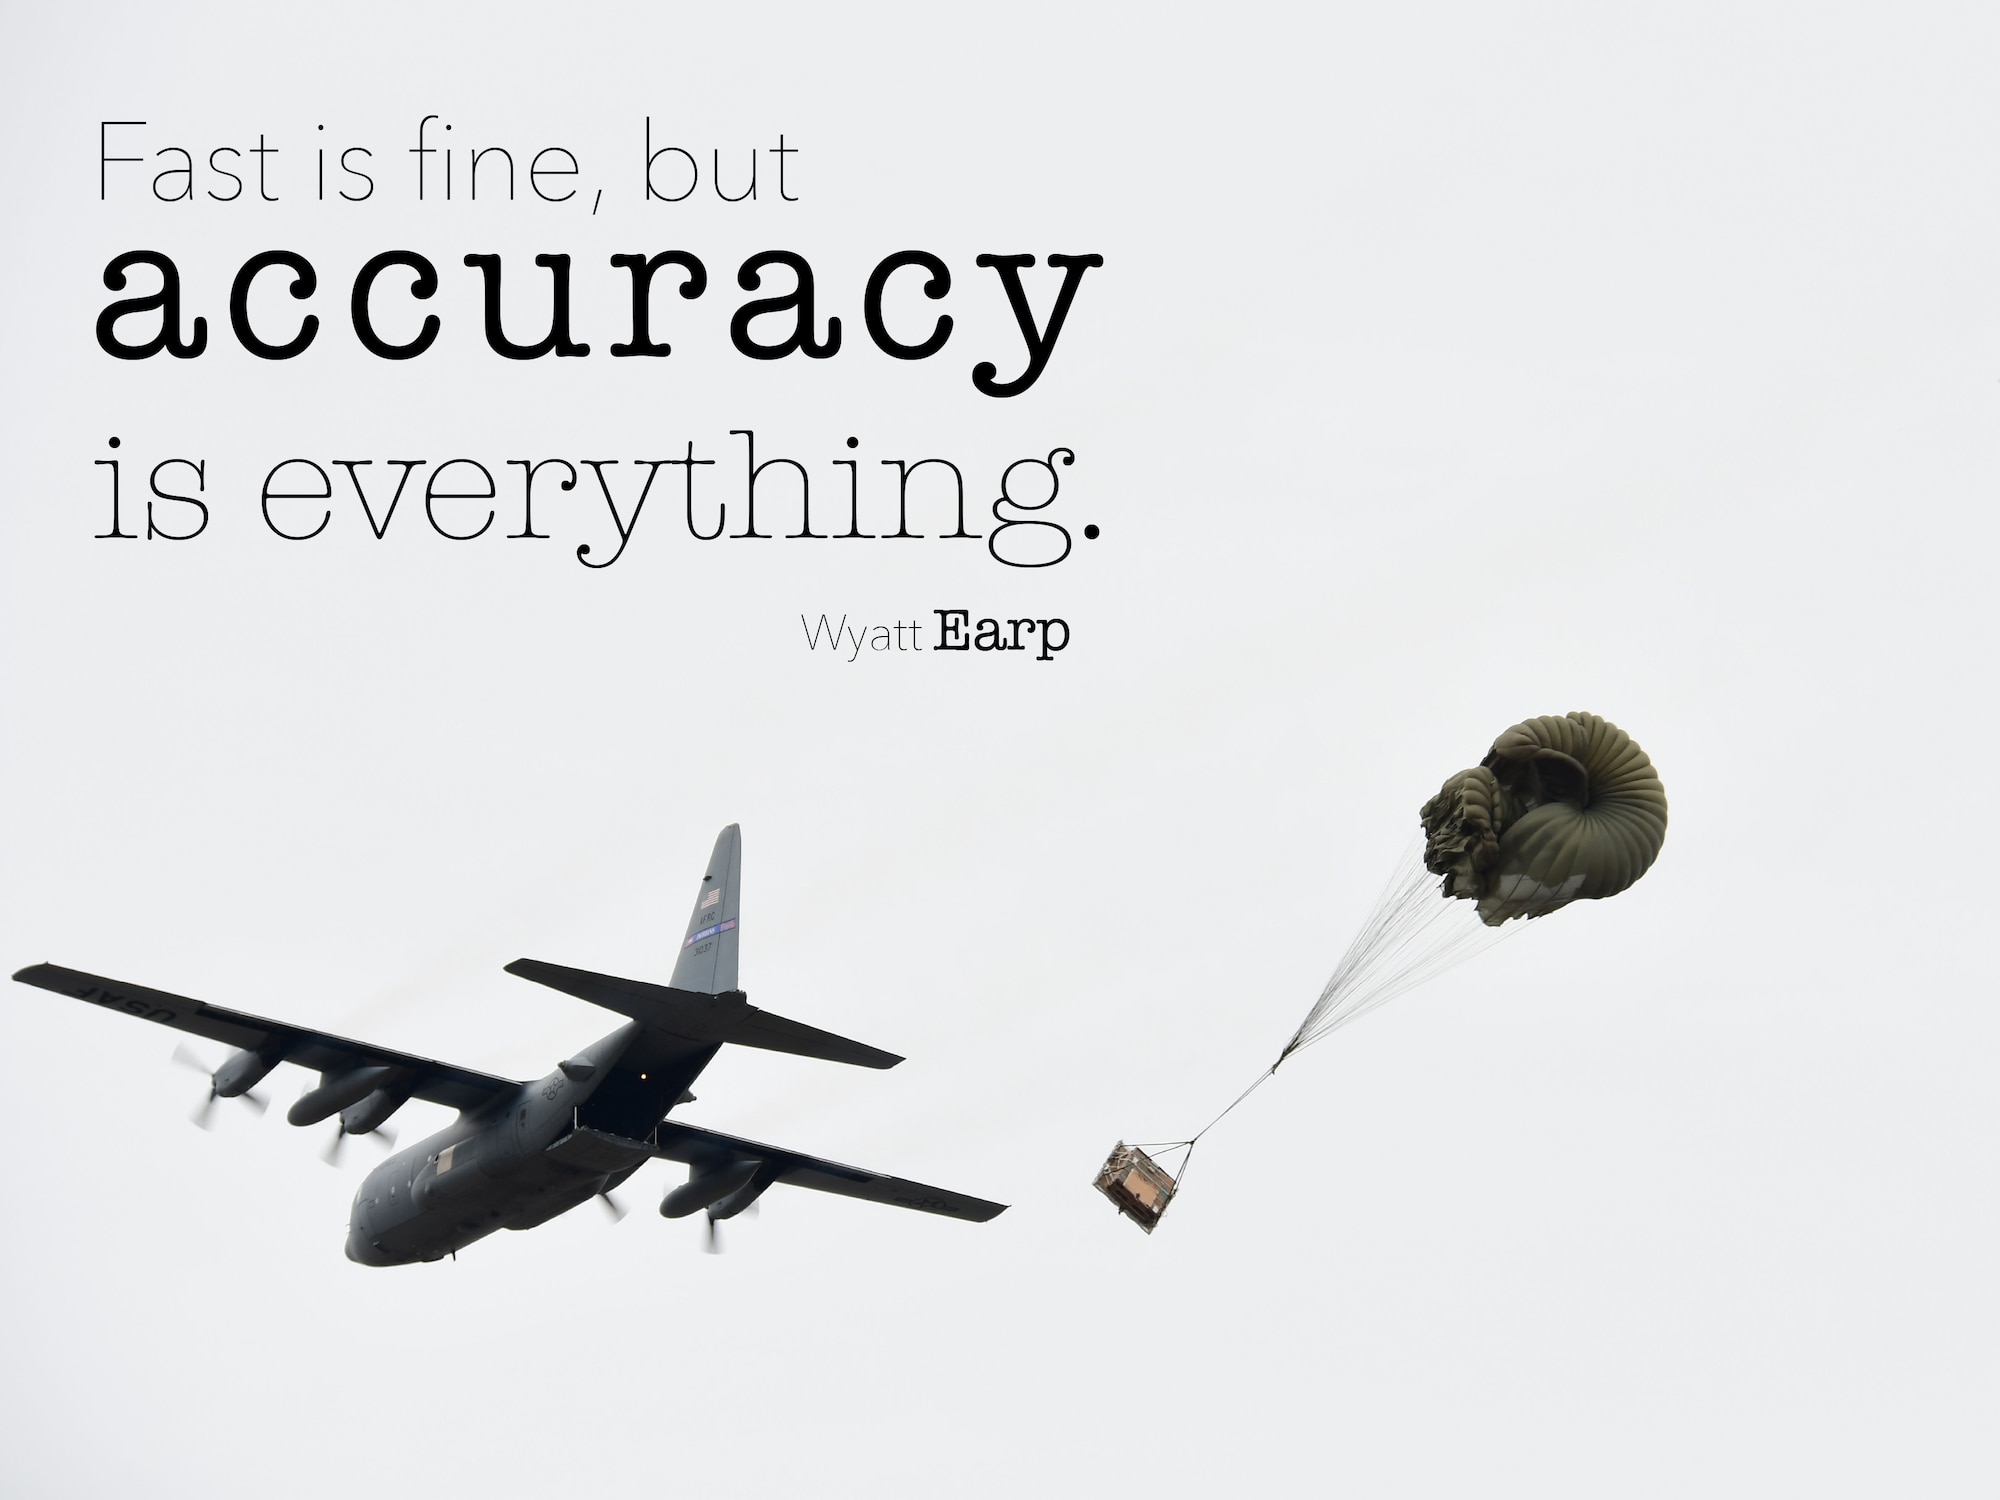 This week's Monday Motivation is from Wyatt Earp:

"Fast is fine, but accuracy is everything."

(U.S. Air Force graphic/Staff Sgt. Andrew Park)